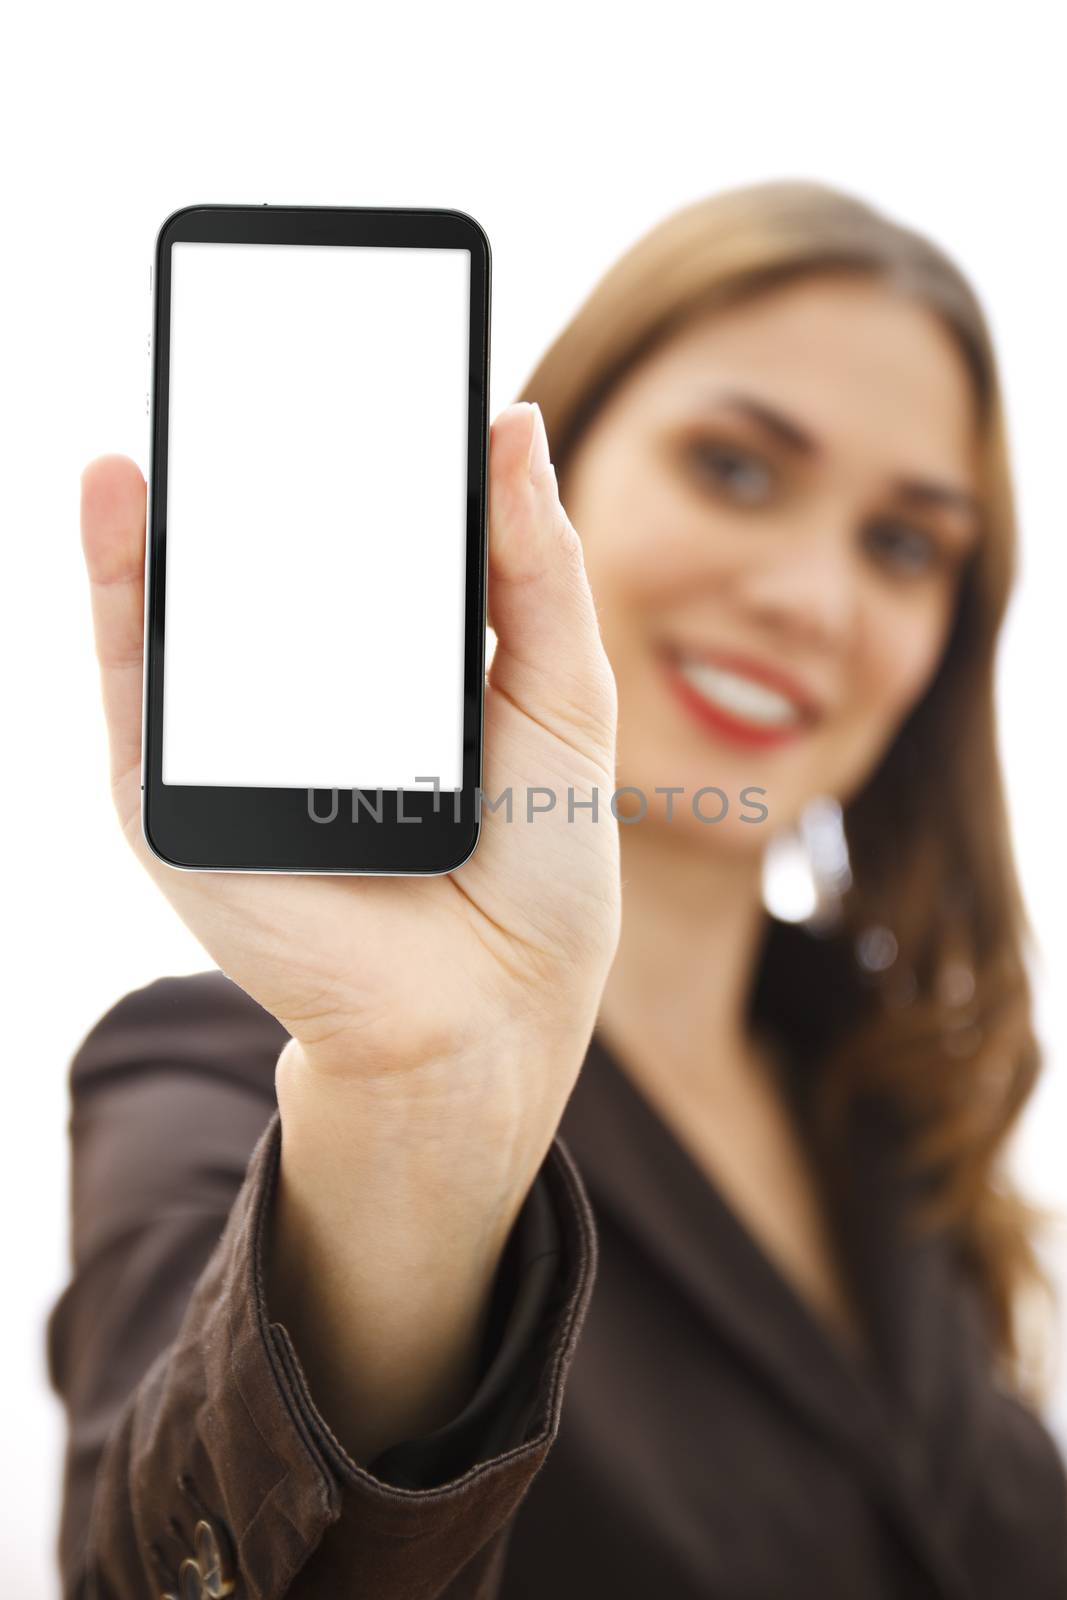 Businesswoman out of focus at background showing a mobile phone with white display. Isolated on white background.